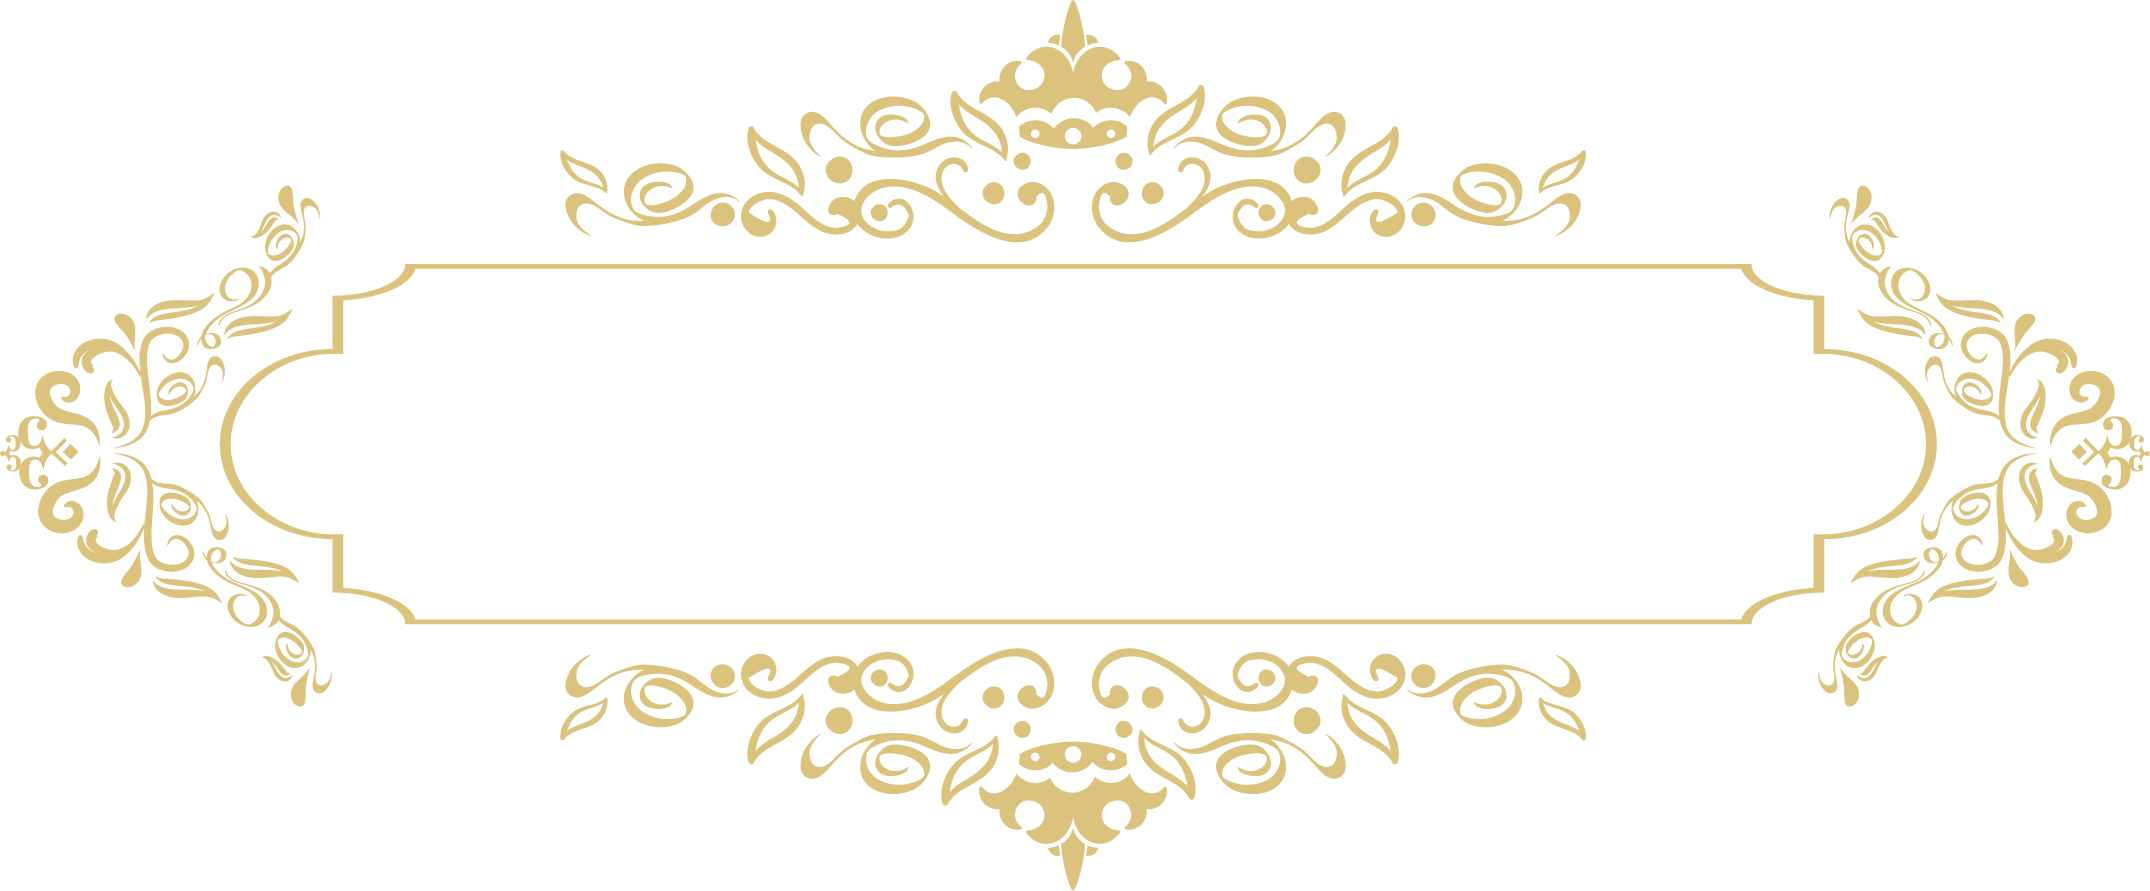 A Black Background With Gold Swirls And Dots